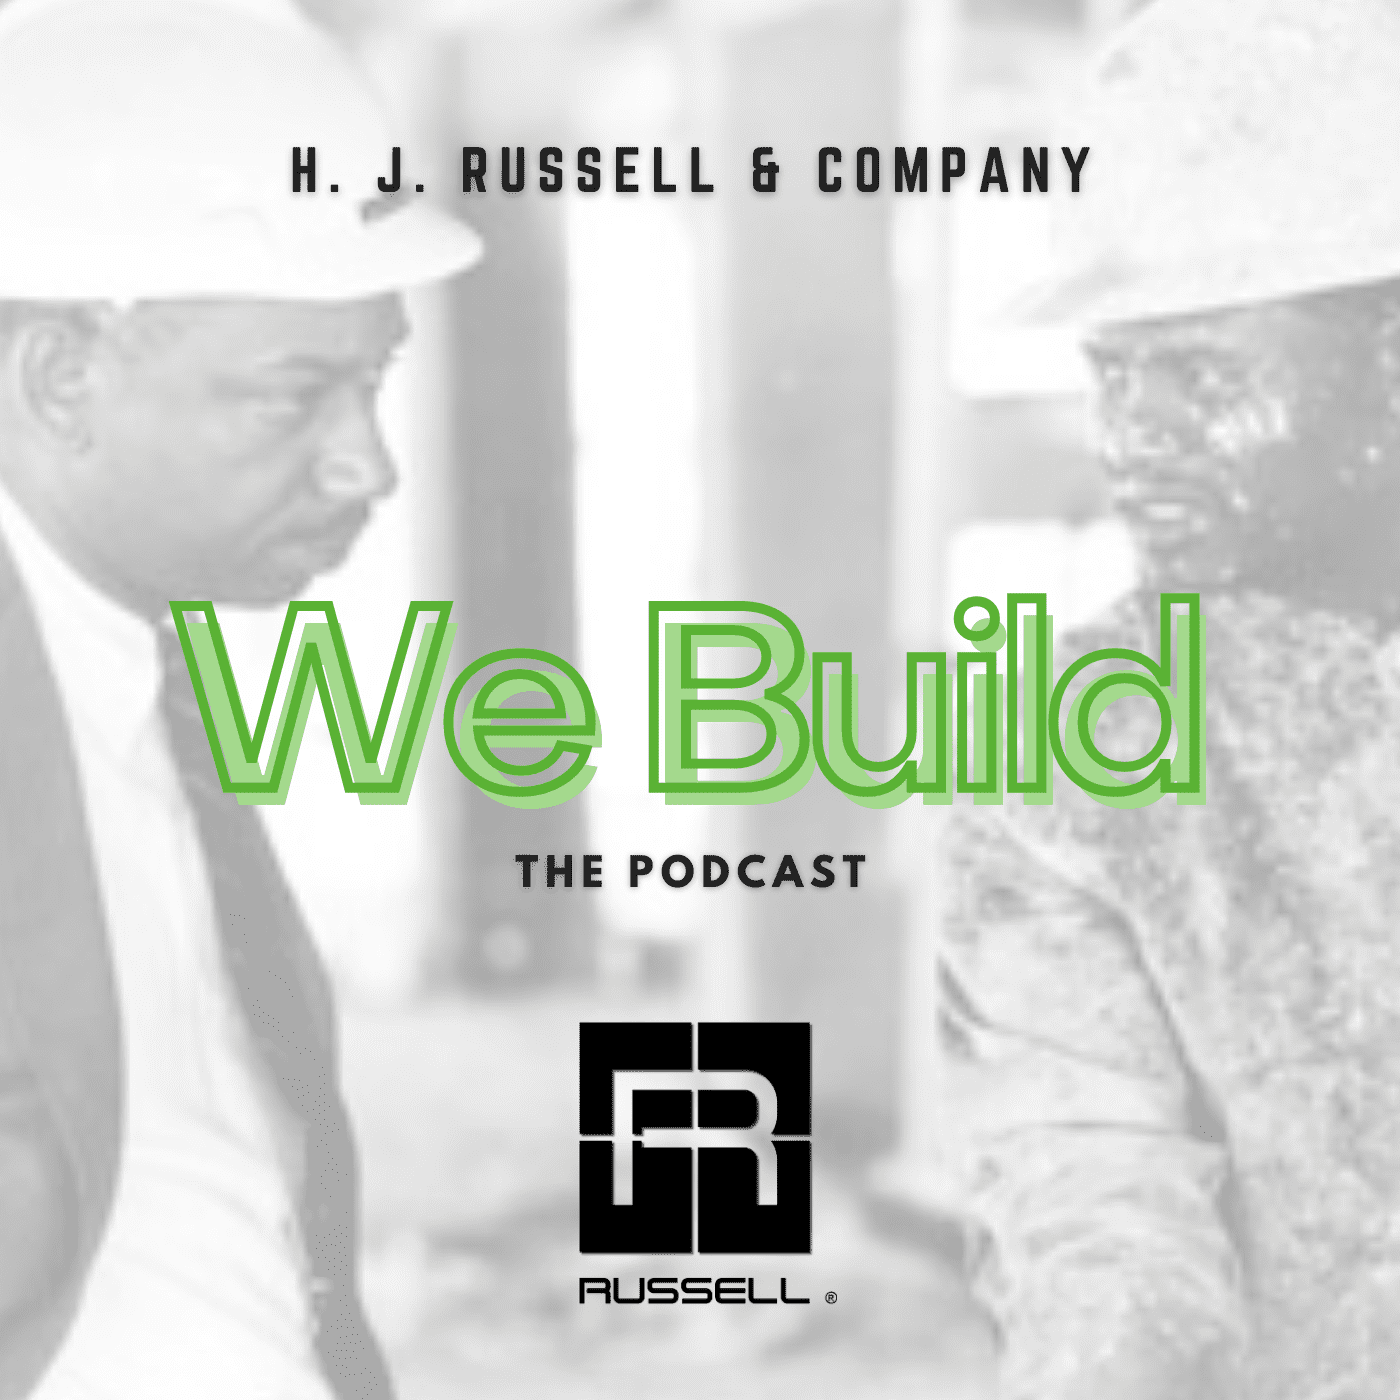 Russell's We Build The Podcast